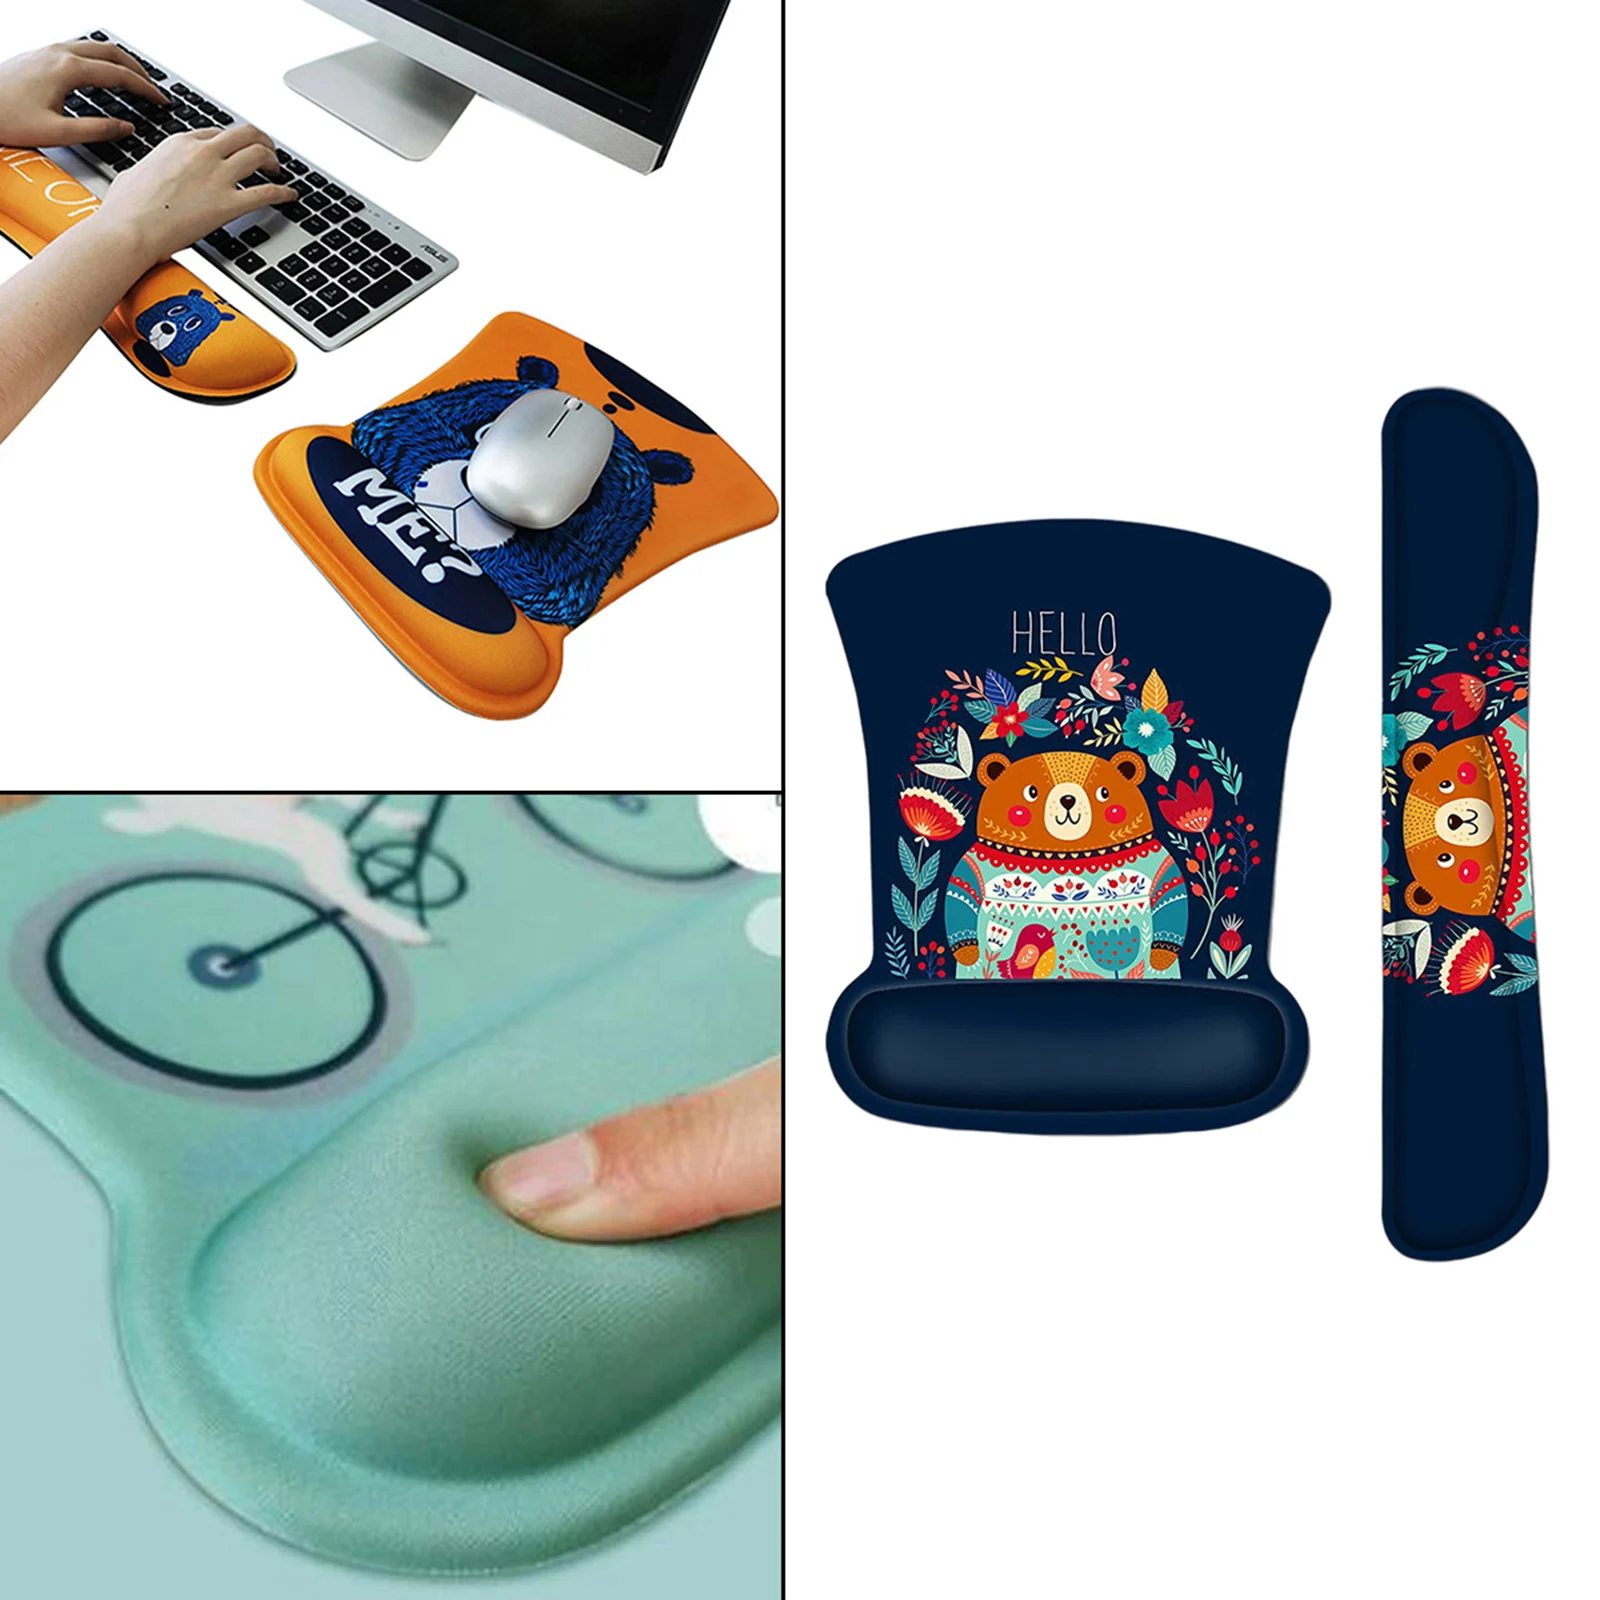 

Silicone Cute Cat Mouse Pad and Wrist Support Comfortable Mousepad Guard Memory Foam for Computers Laptop Relieve Wrist Pain